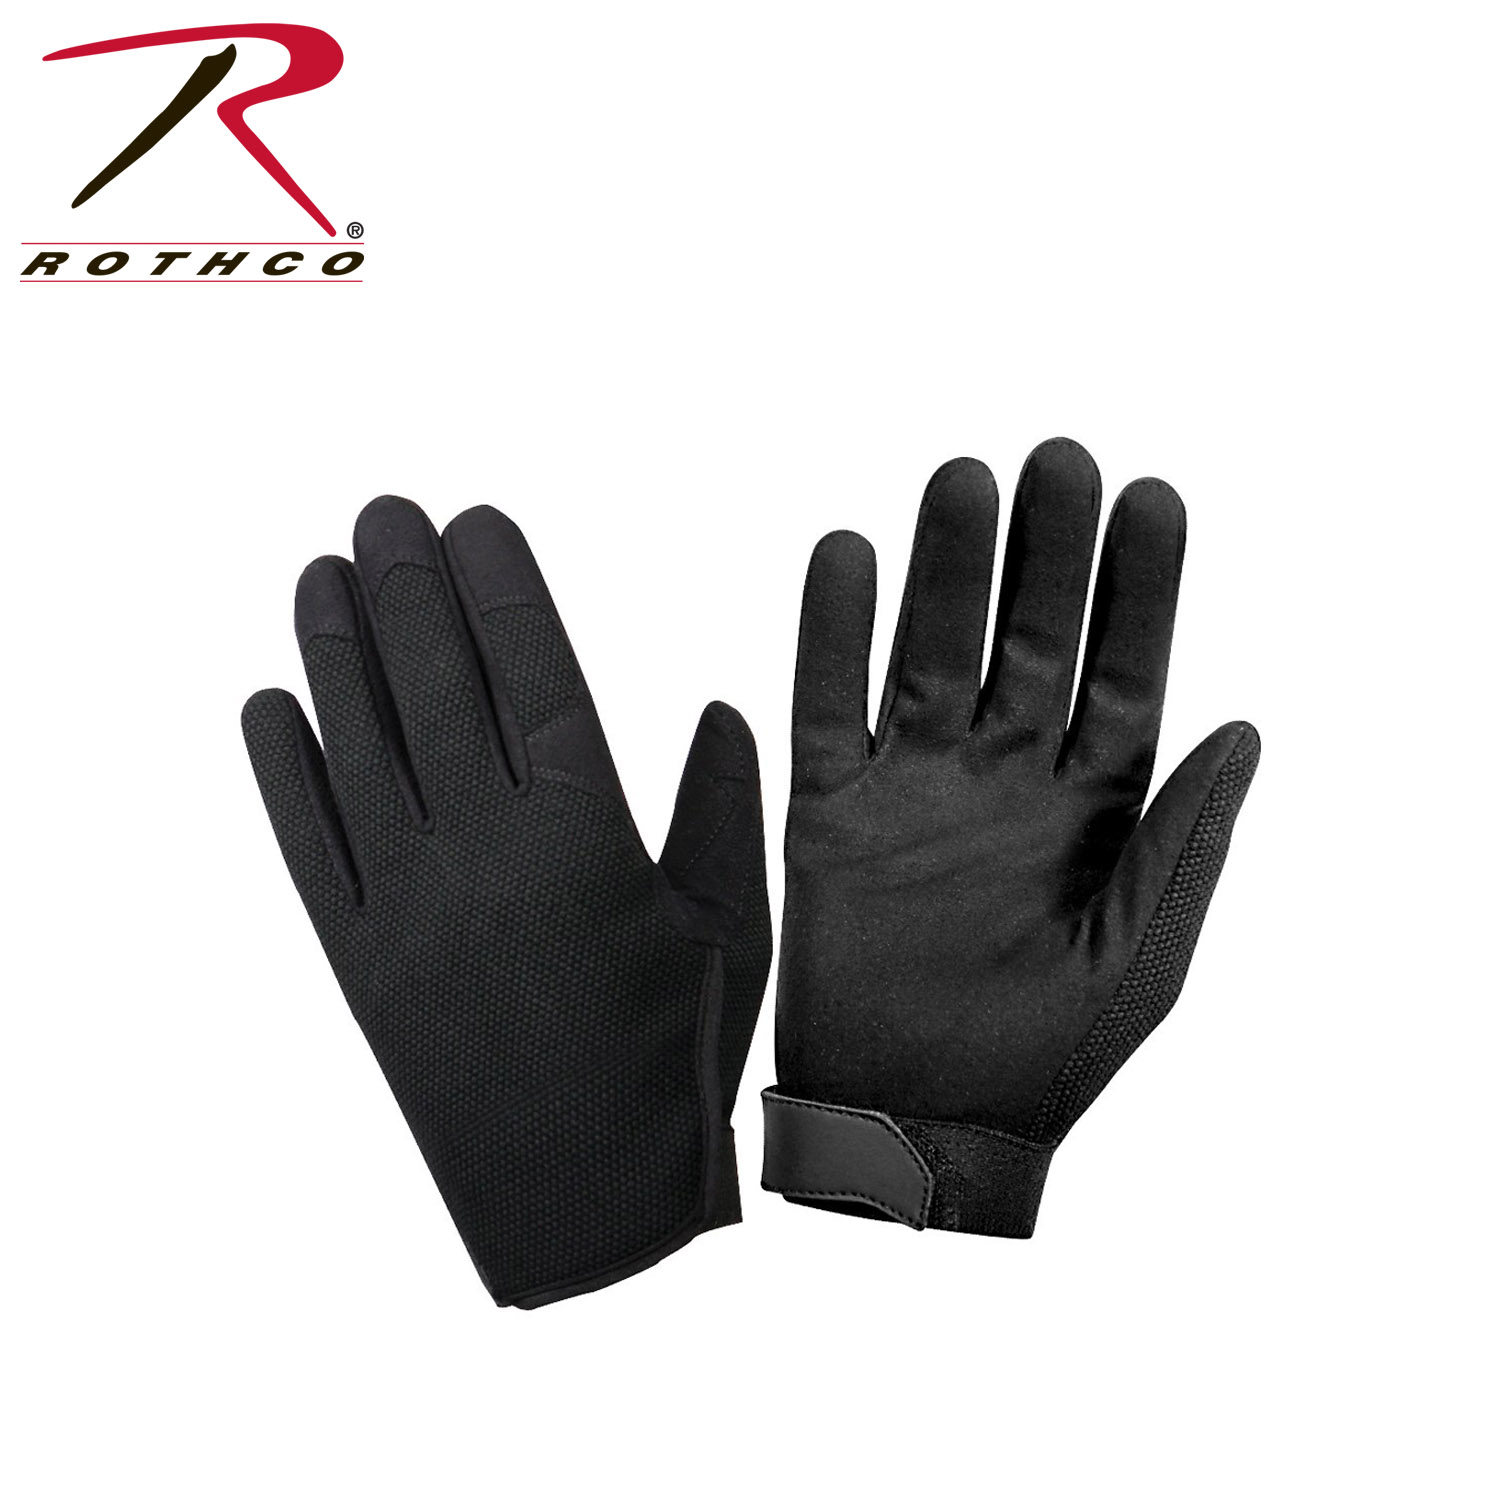 Rothco Lightweight Mesh Tactical Glove 